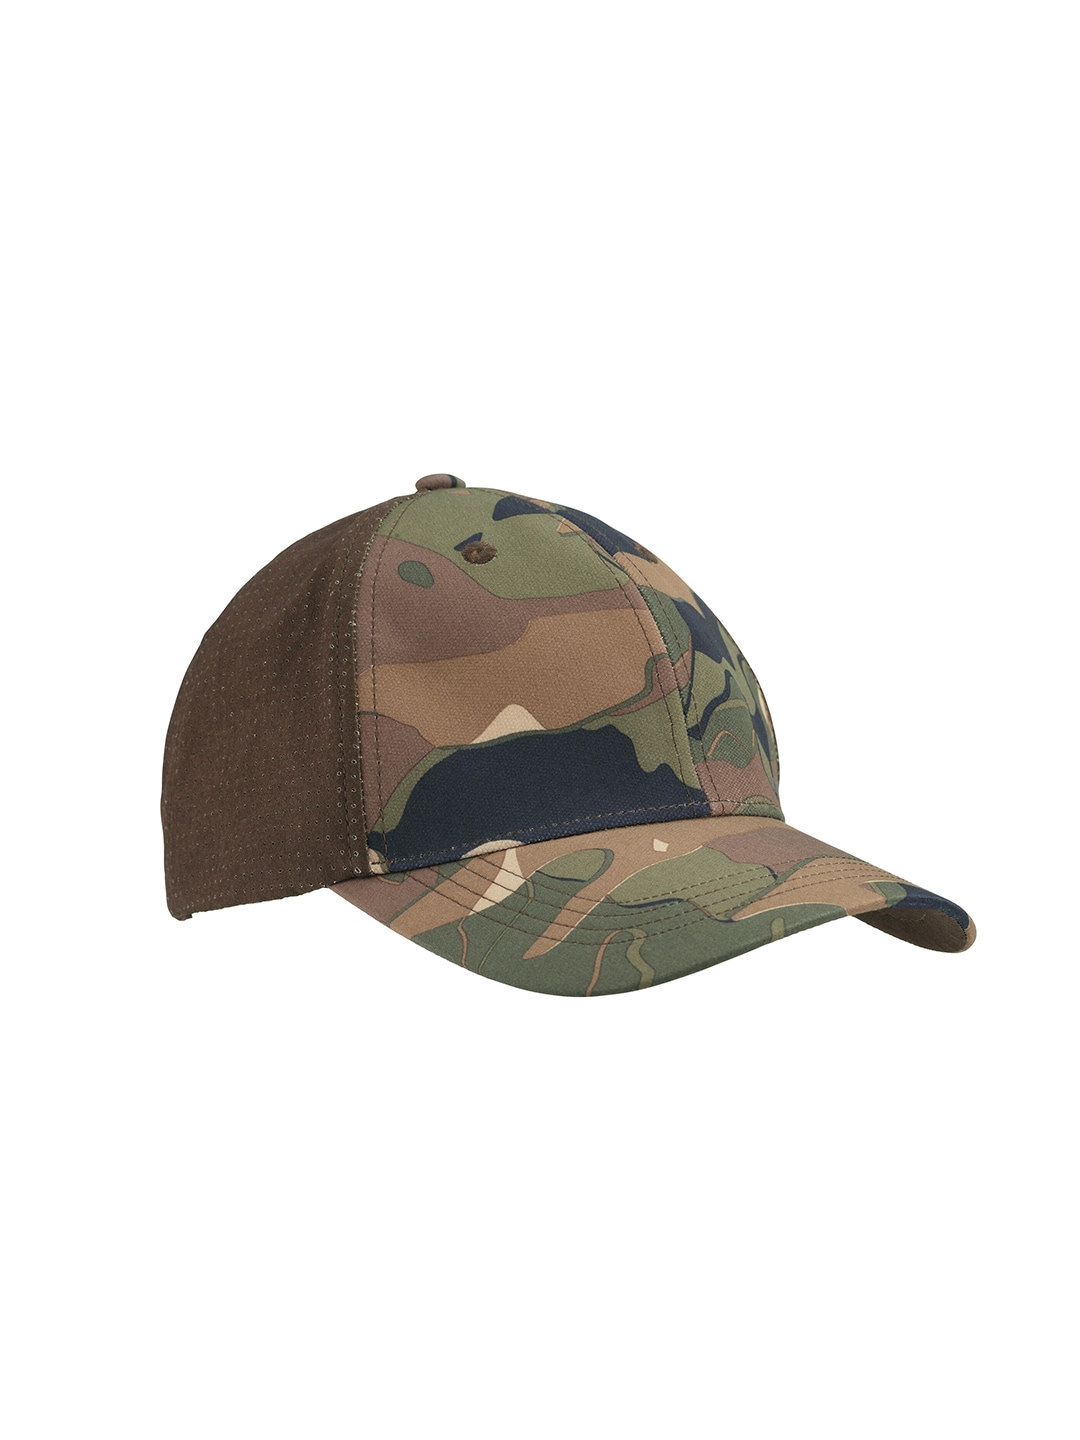 SOLOGNAC By Decathlon Unisex Brown Caps Price in India